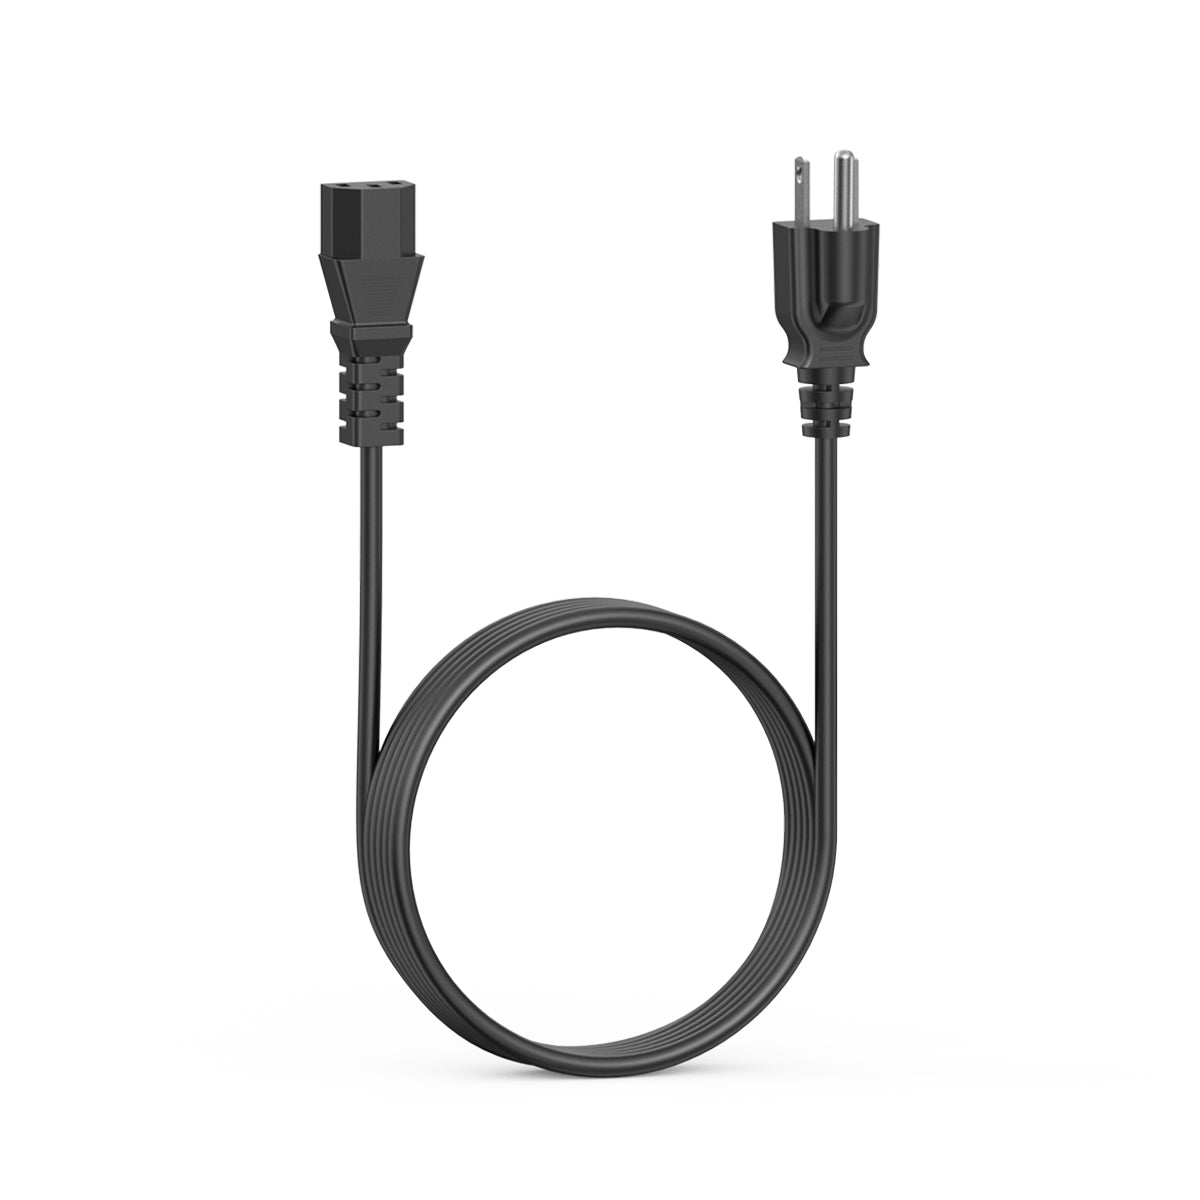 OUPES 4ft Charging Cable Adapter